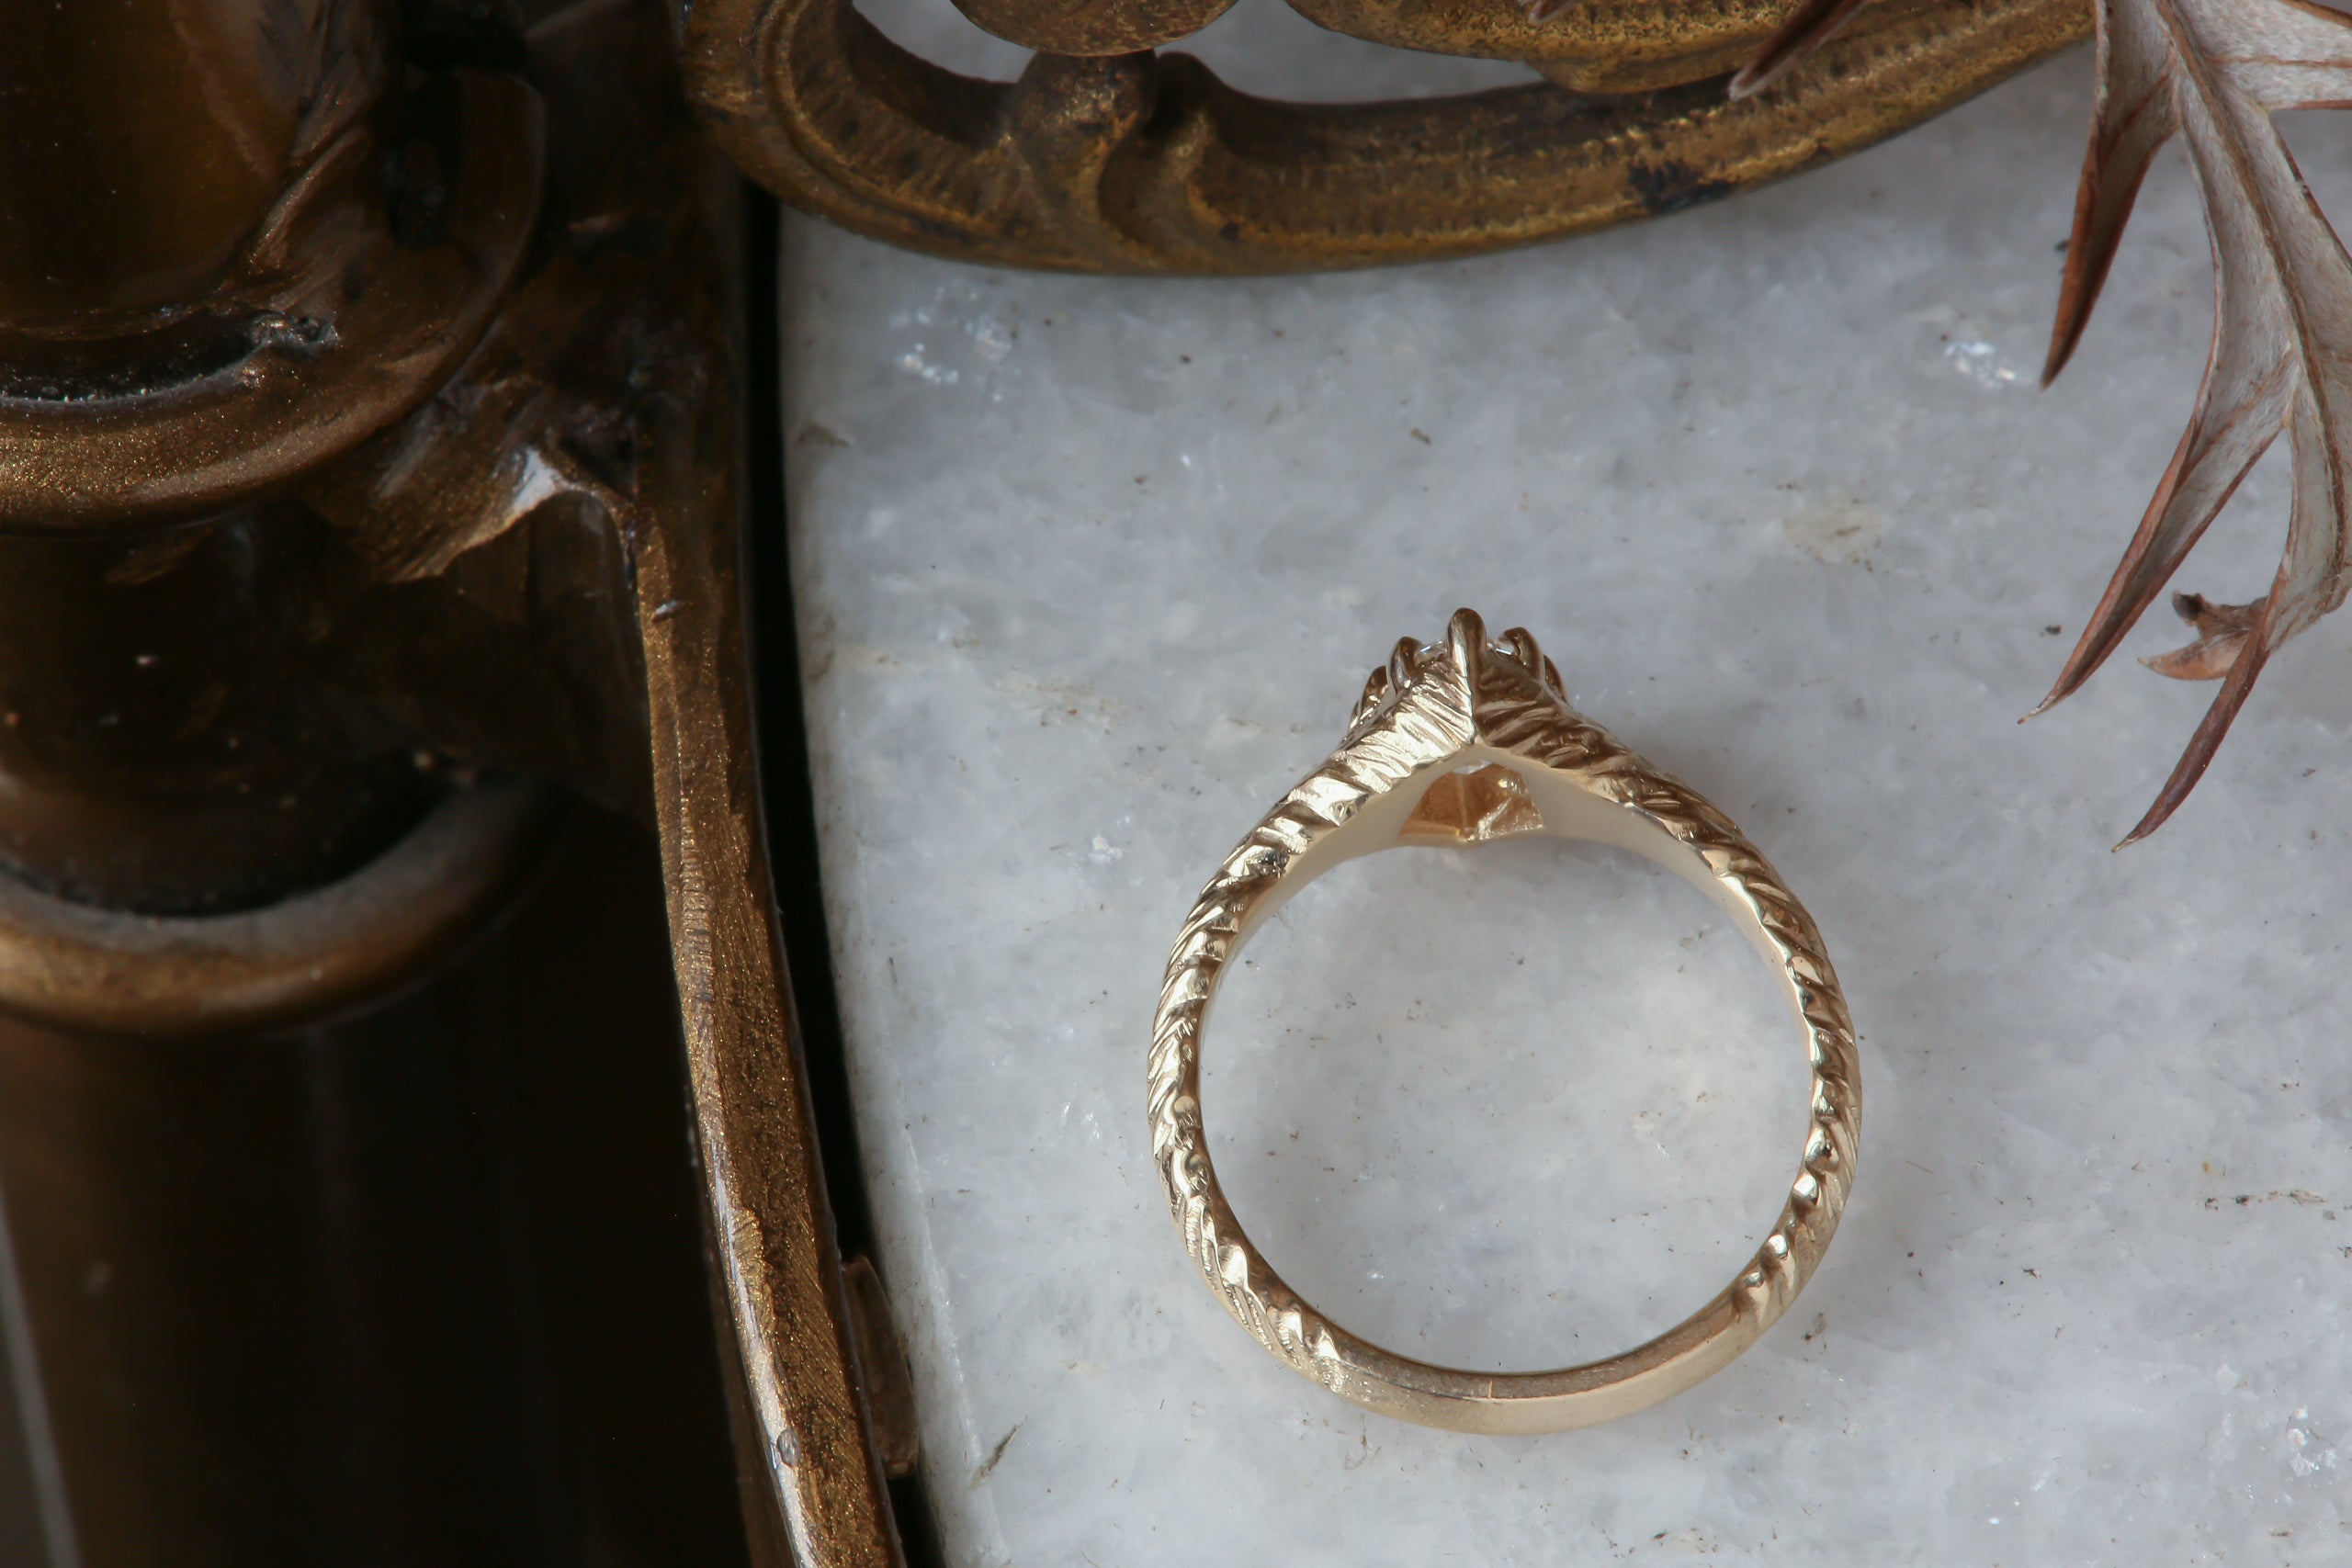 The Plume Signet Ring in Natural Kite Cut Diamond